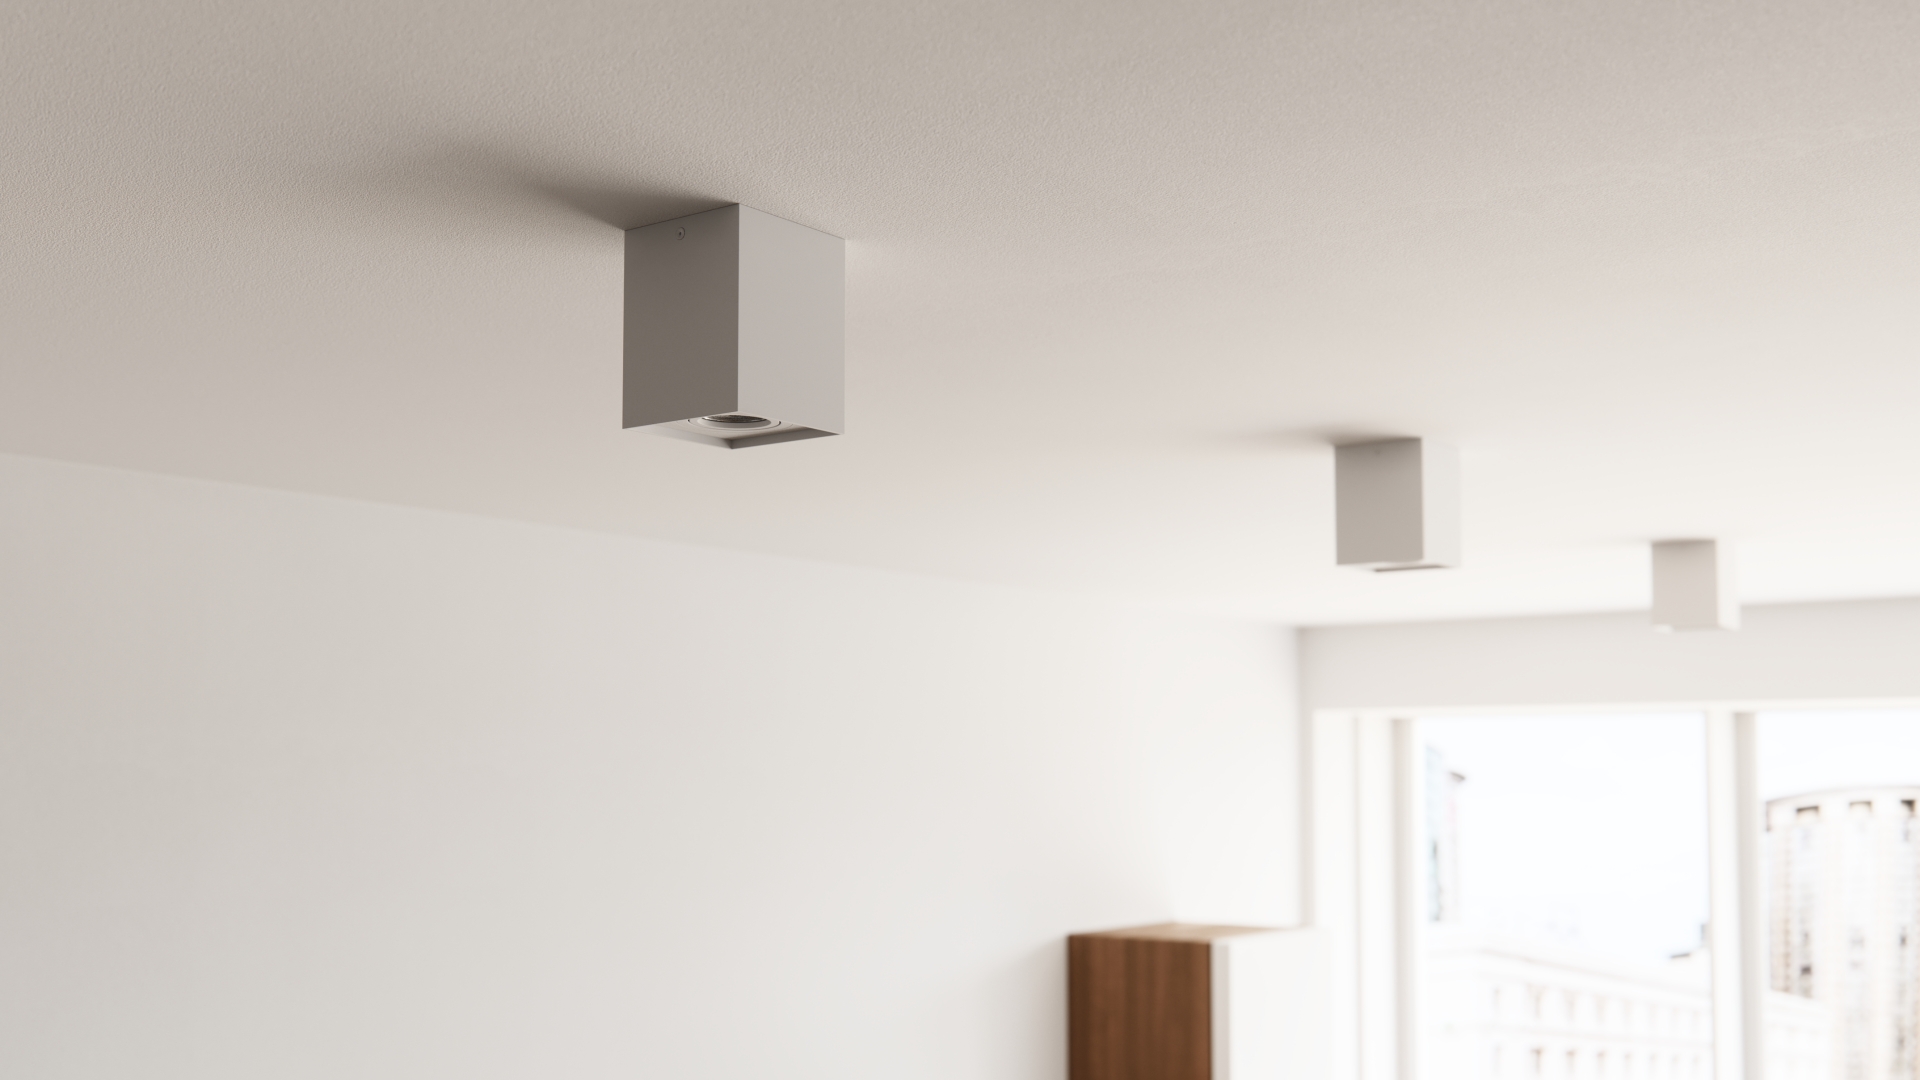 Surface mounted white fixtures